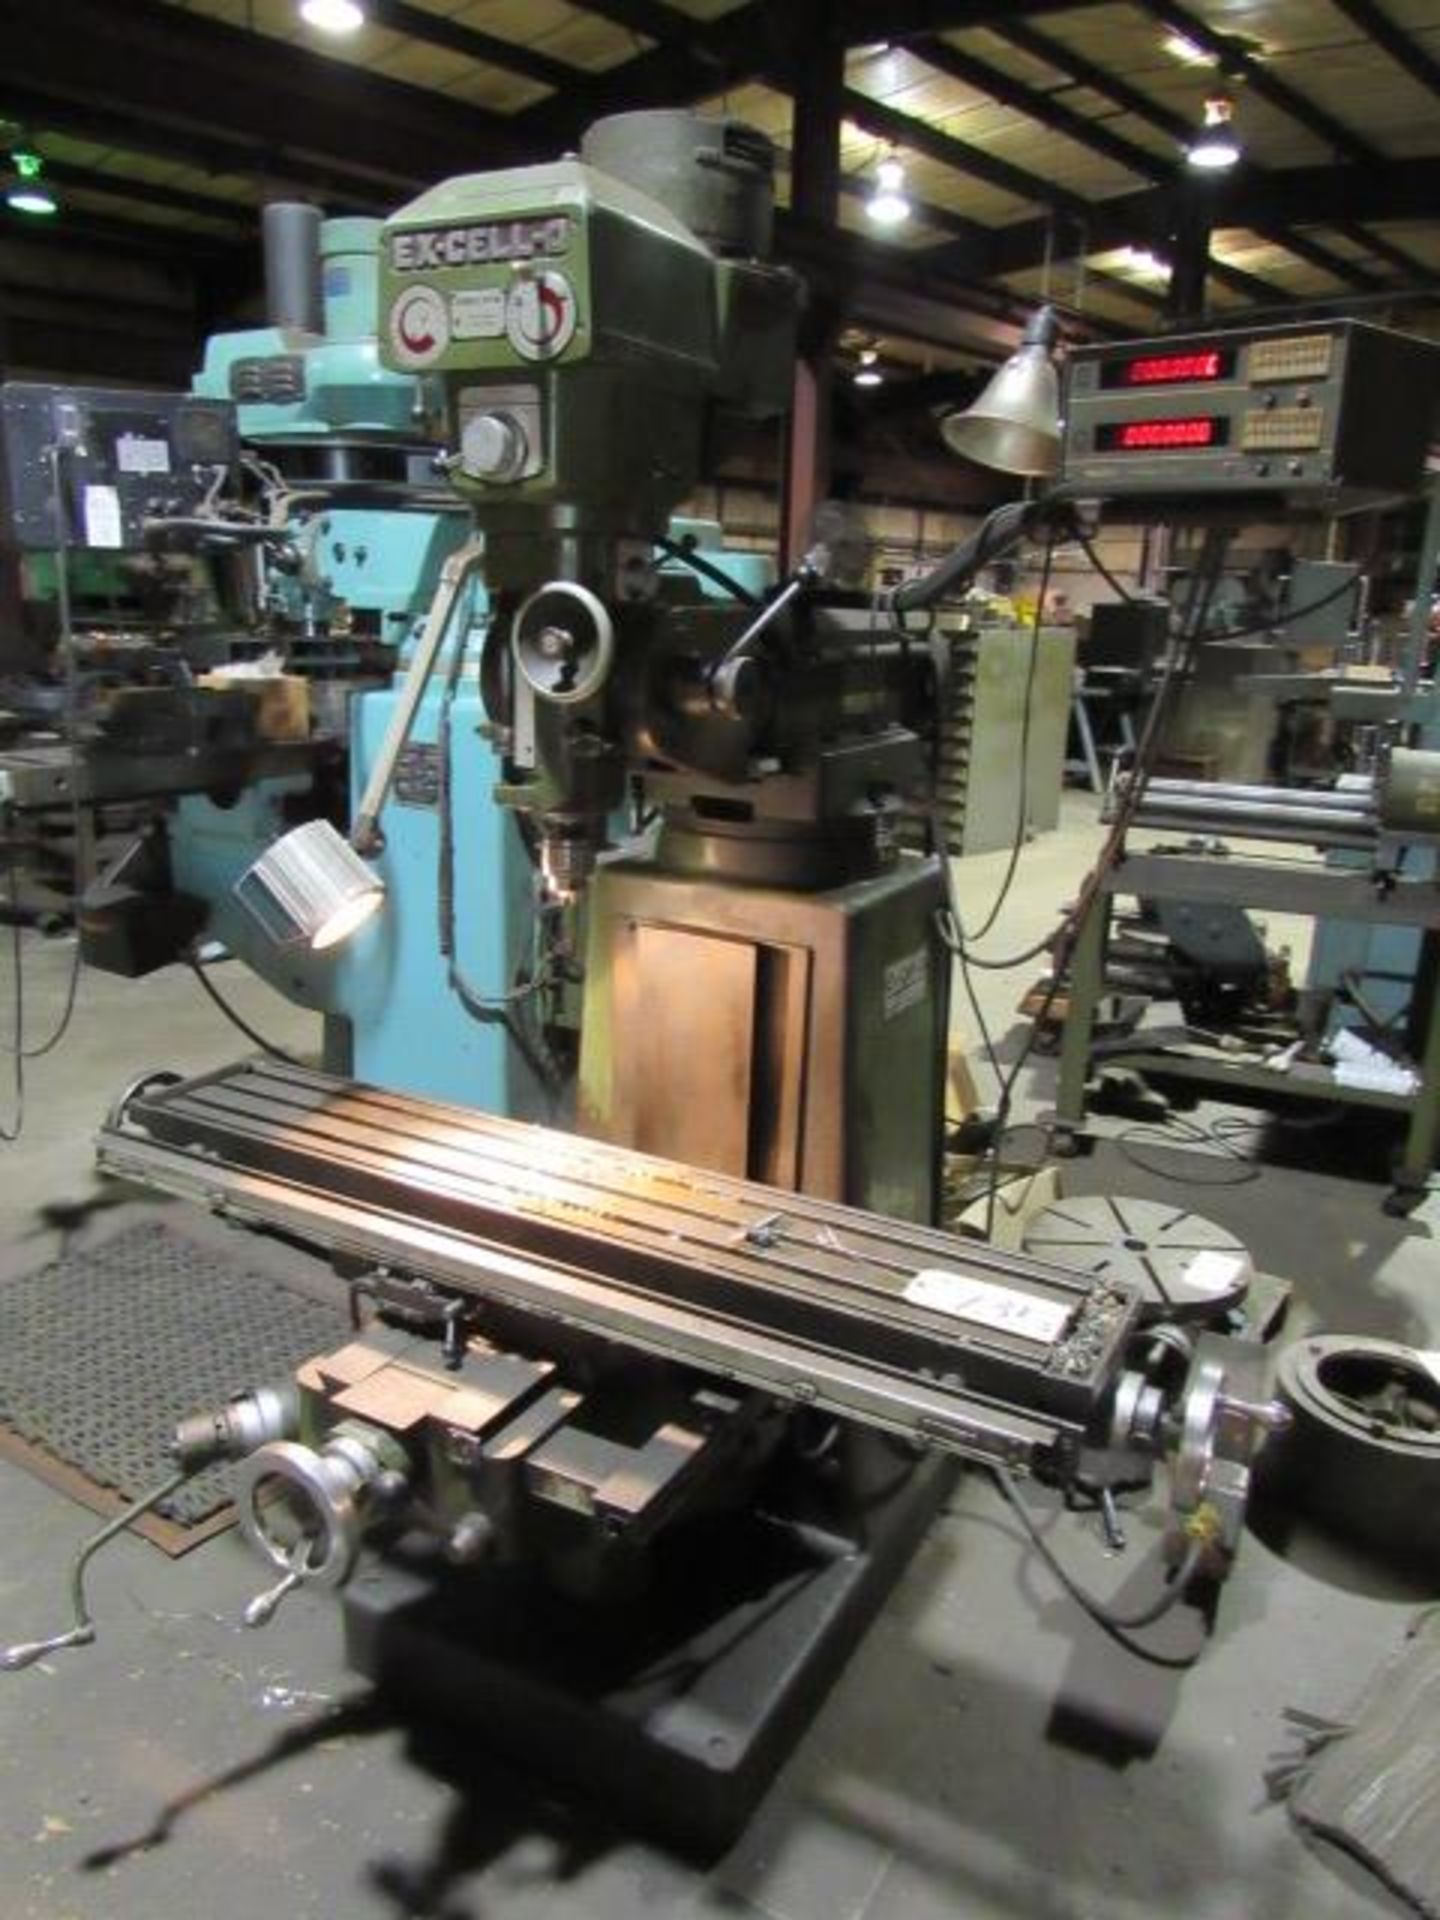 Ex-Cell-O Variable Speed Knee Mill with Power Feed Table. DRO, sn:6028222 - Image 6 of 8